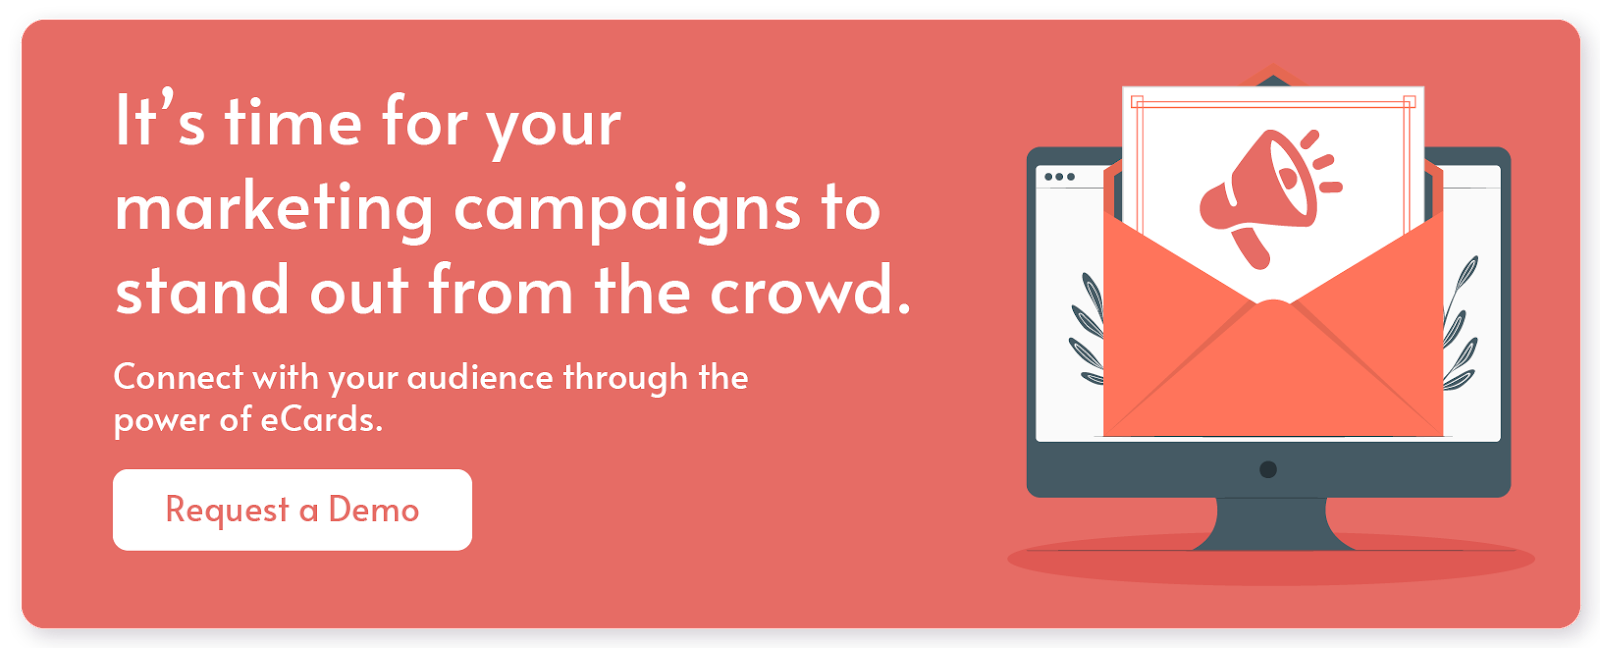 It's time for your marketing campaigns to stand out from the crowd. Connect with your audience through the power of eCards. Request a demo.